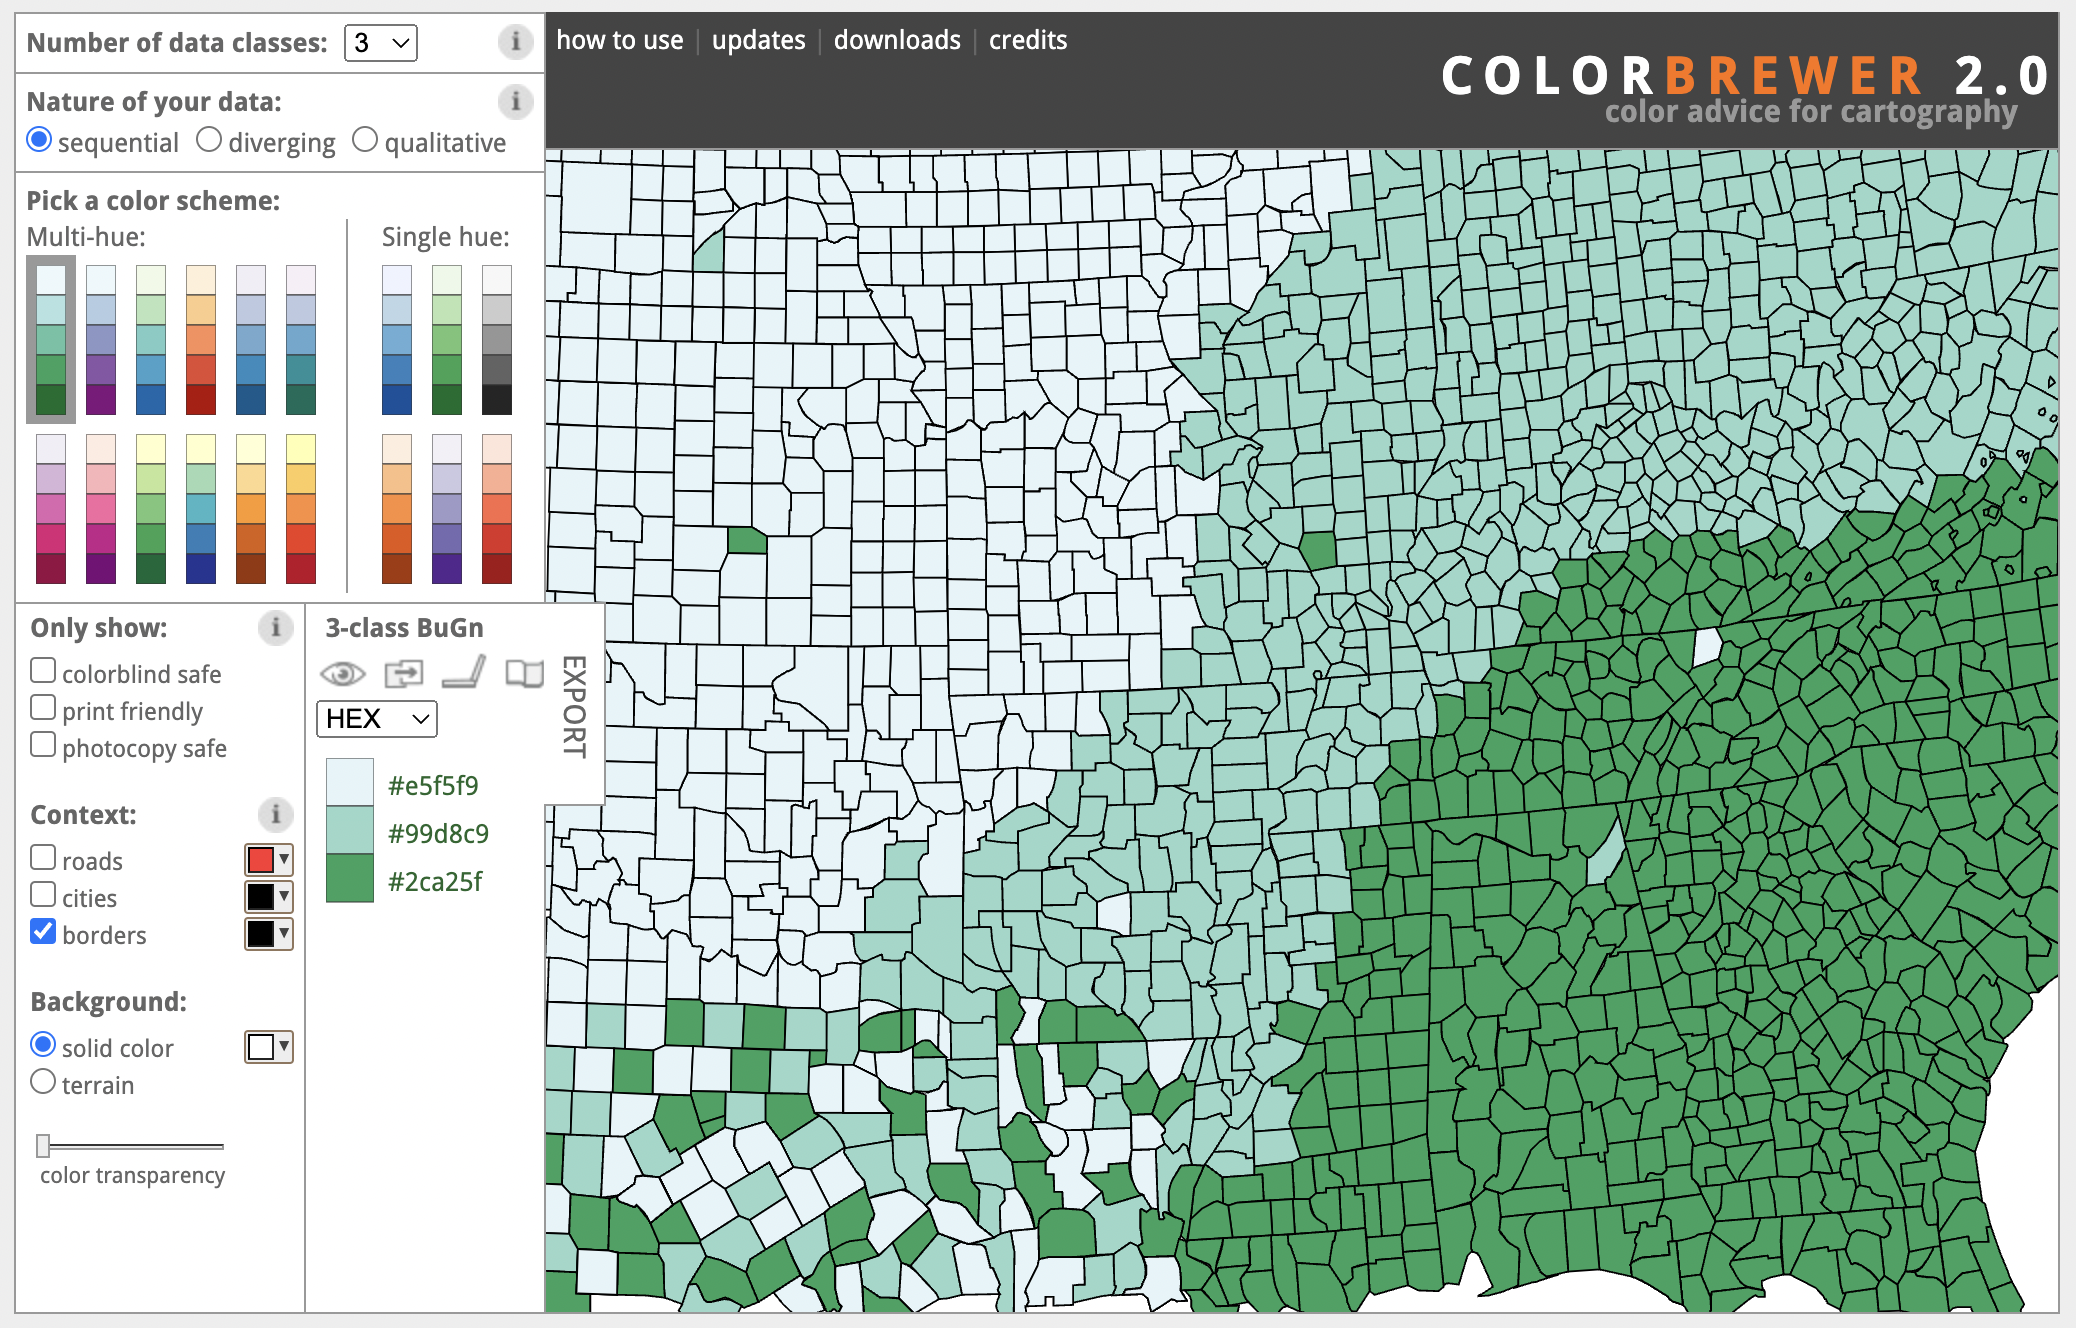 A screenshot the ColorBrewer website showing a choropleth map and possible color scales